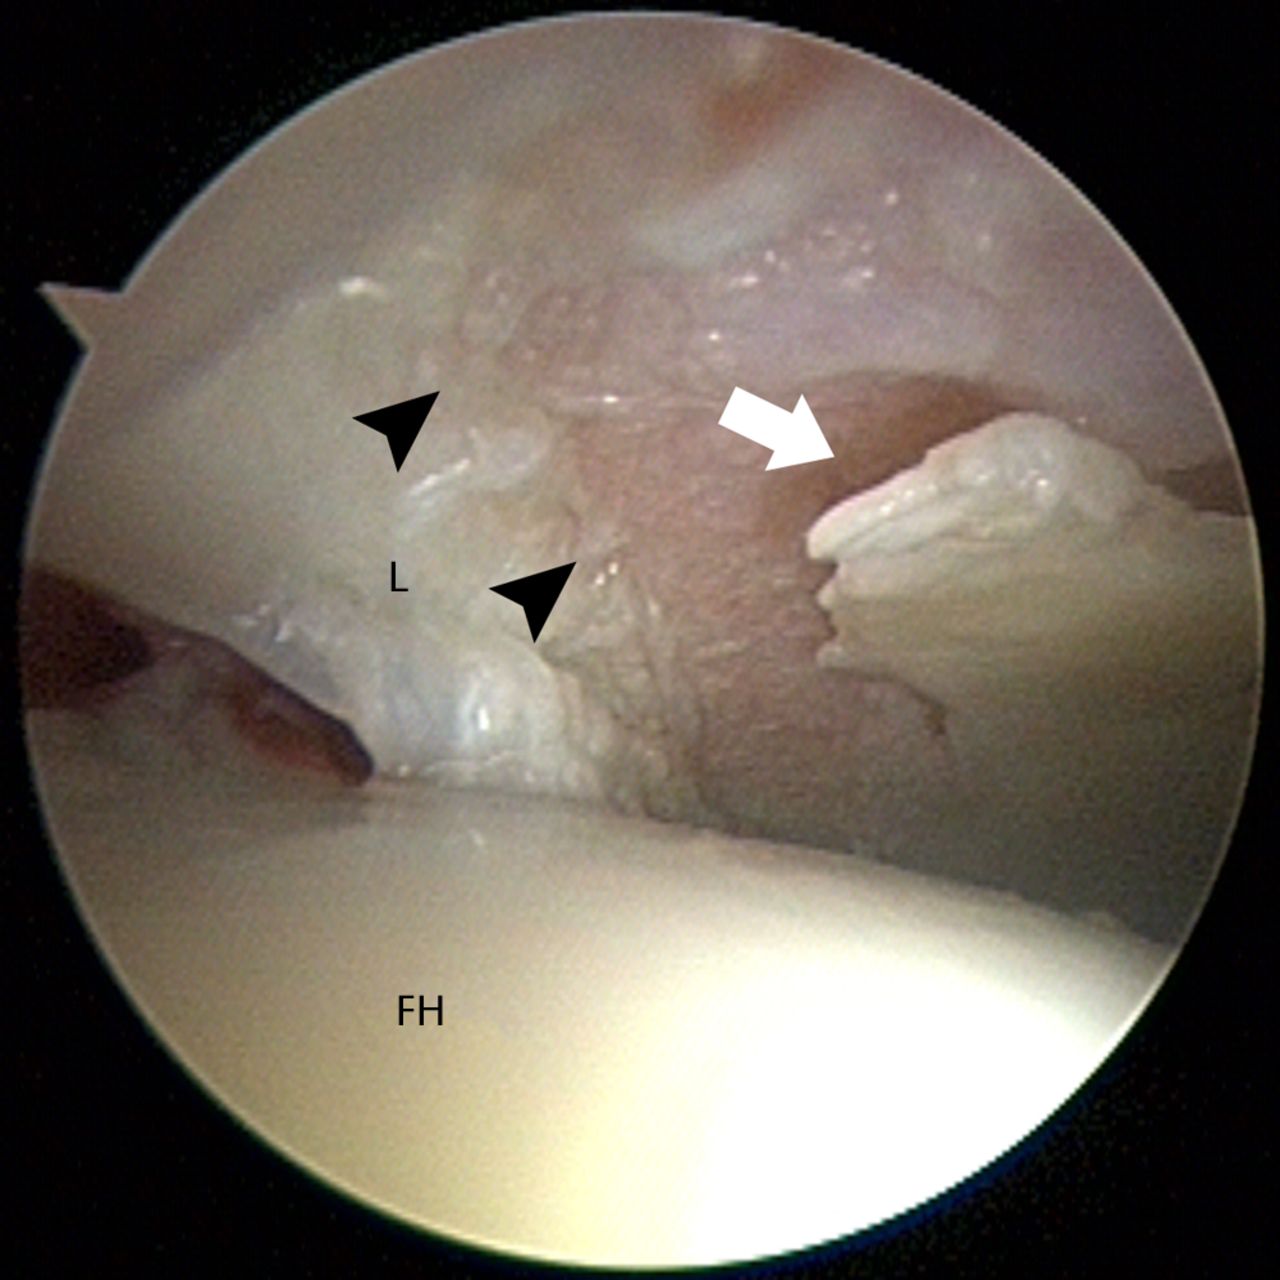 Fig. 5 
            Arthroscopic image showing chondrolabral
damage occurring as a result of cam impingement. The deformity at
the head–neck junction causes a shearing, delamination injury to the
cartilage (white arrow) with tearing at the chondrolabral junction
(black arrowheads) (L, labrum; FH, femoral head).
          